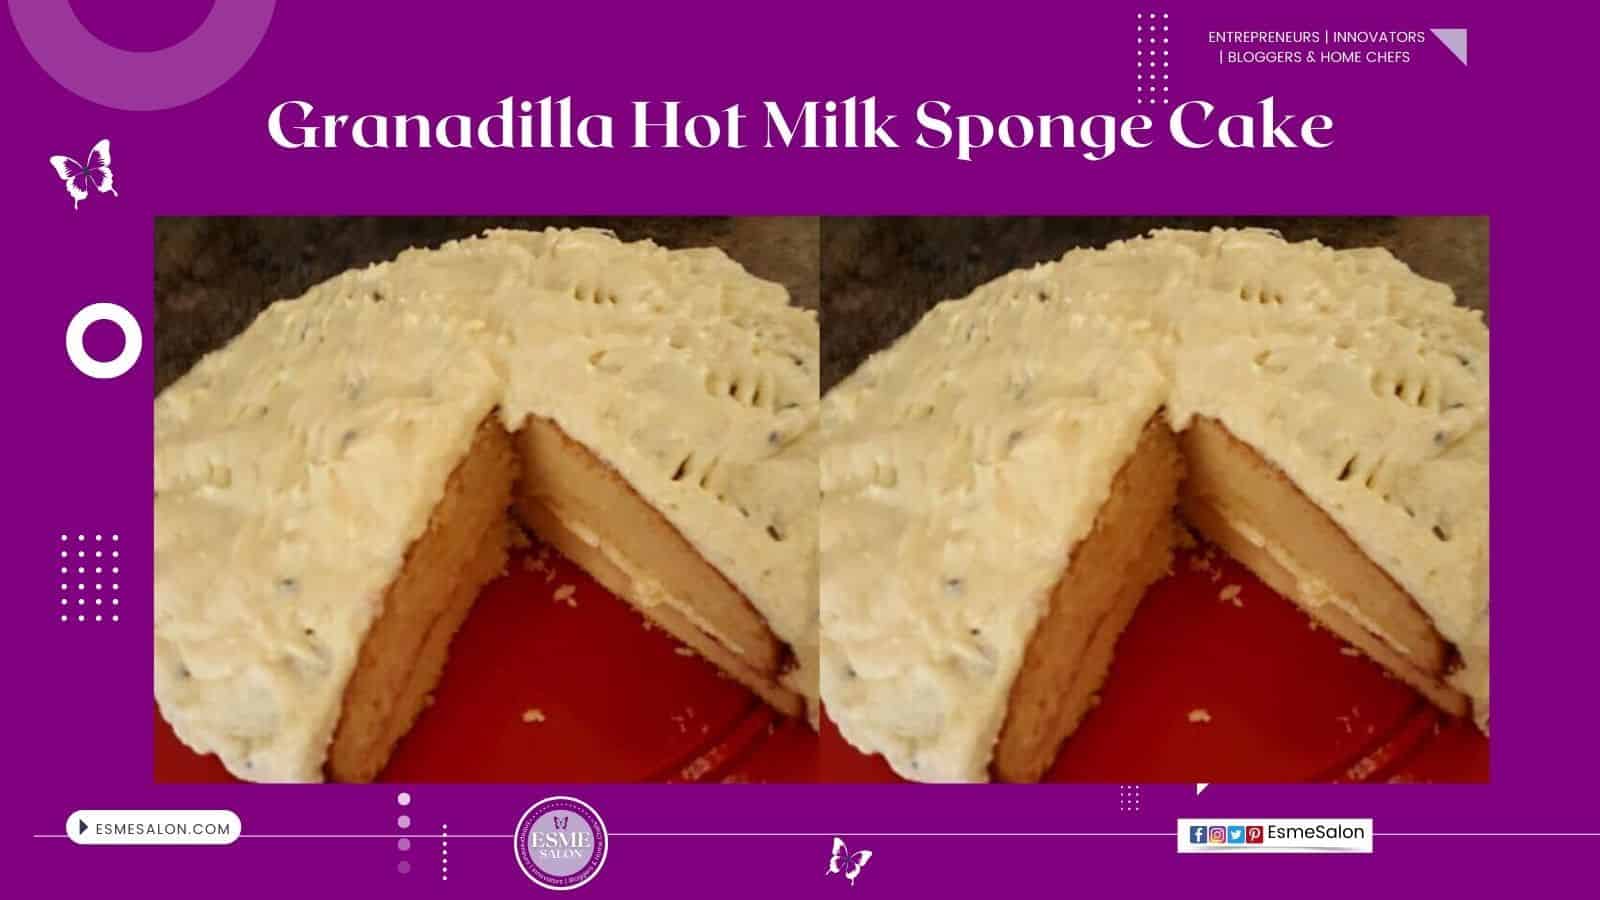 An image of a hot milk sponge cake with Granadilla icing